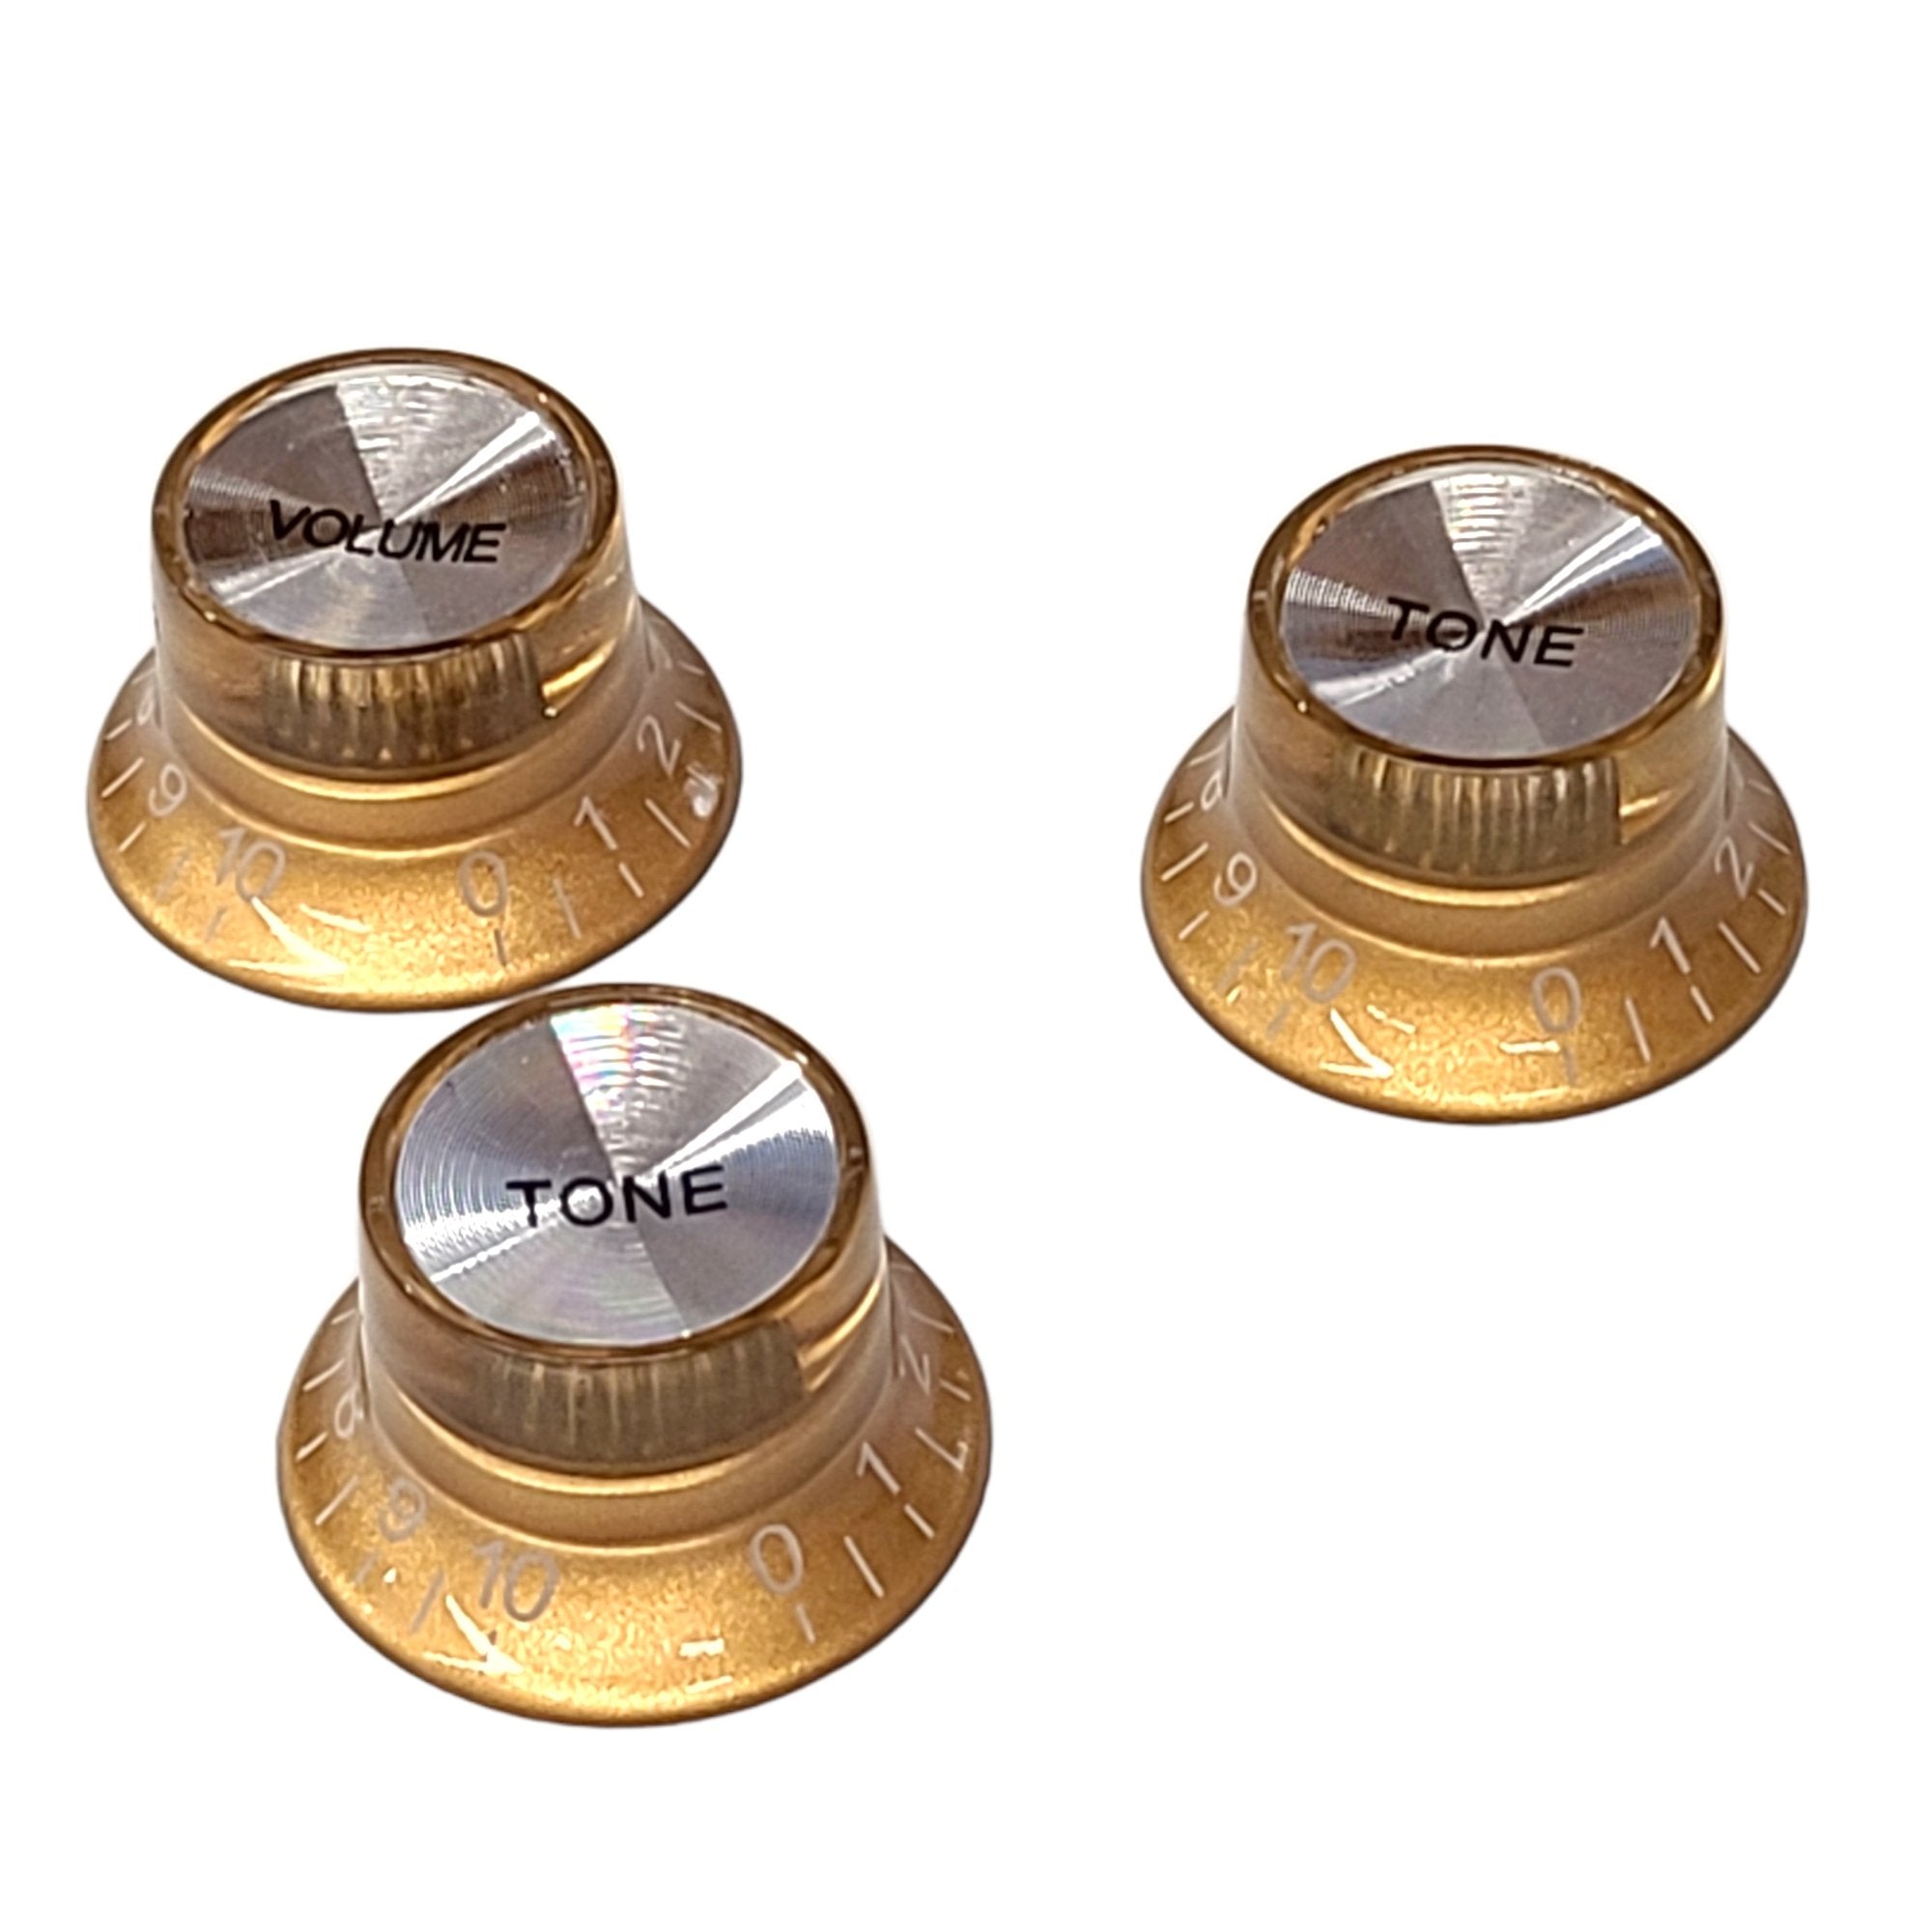 Gold Silver Reflector Cap Knobs 1 Volume 2 Tone Epiphone Top Hat Bell Les Paul